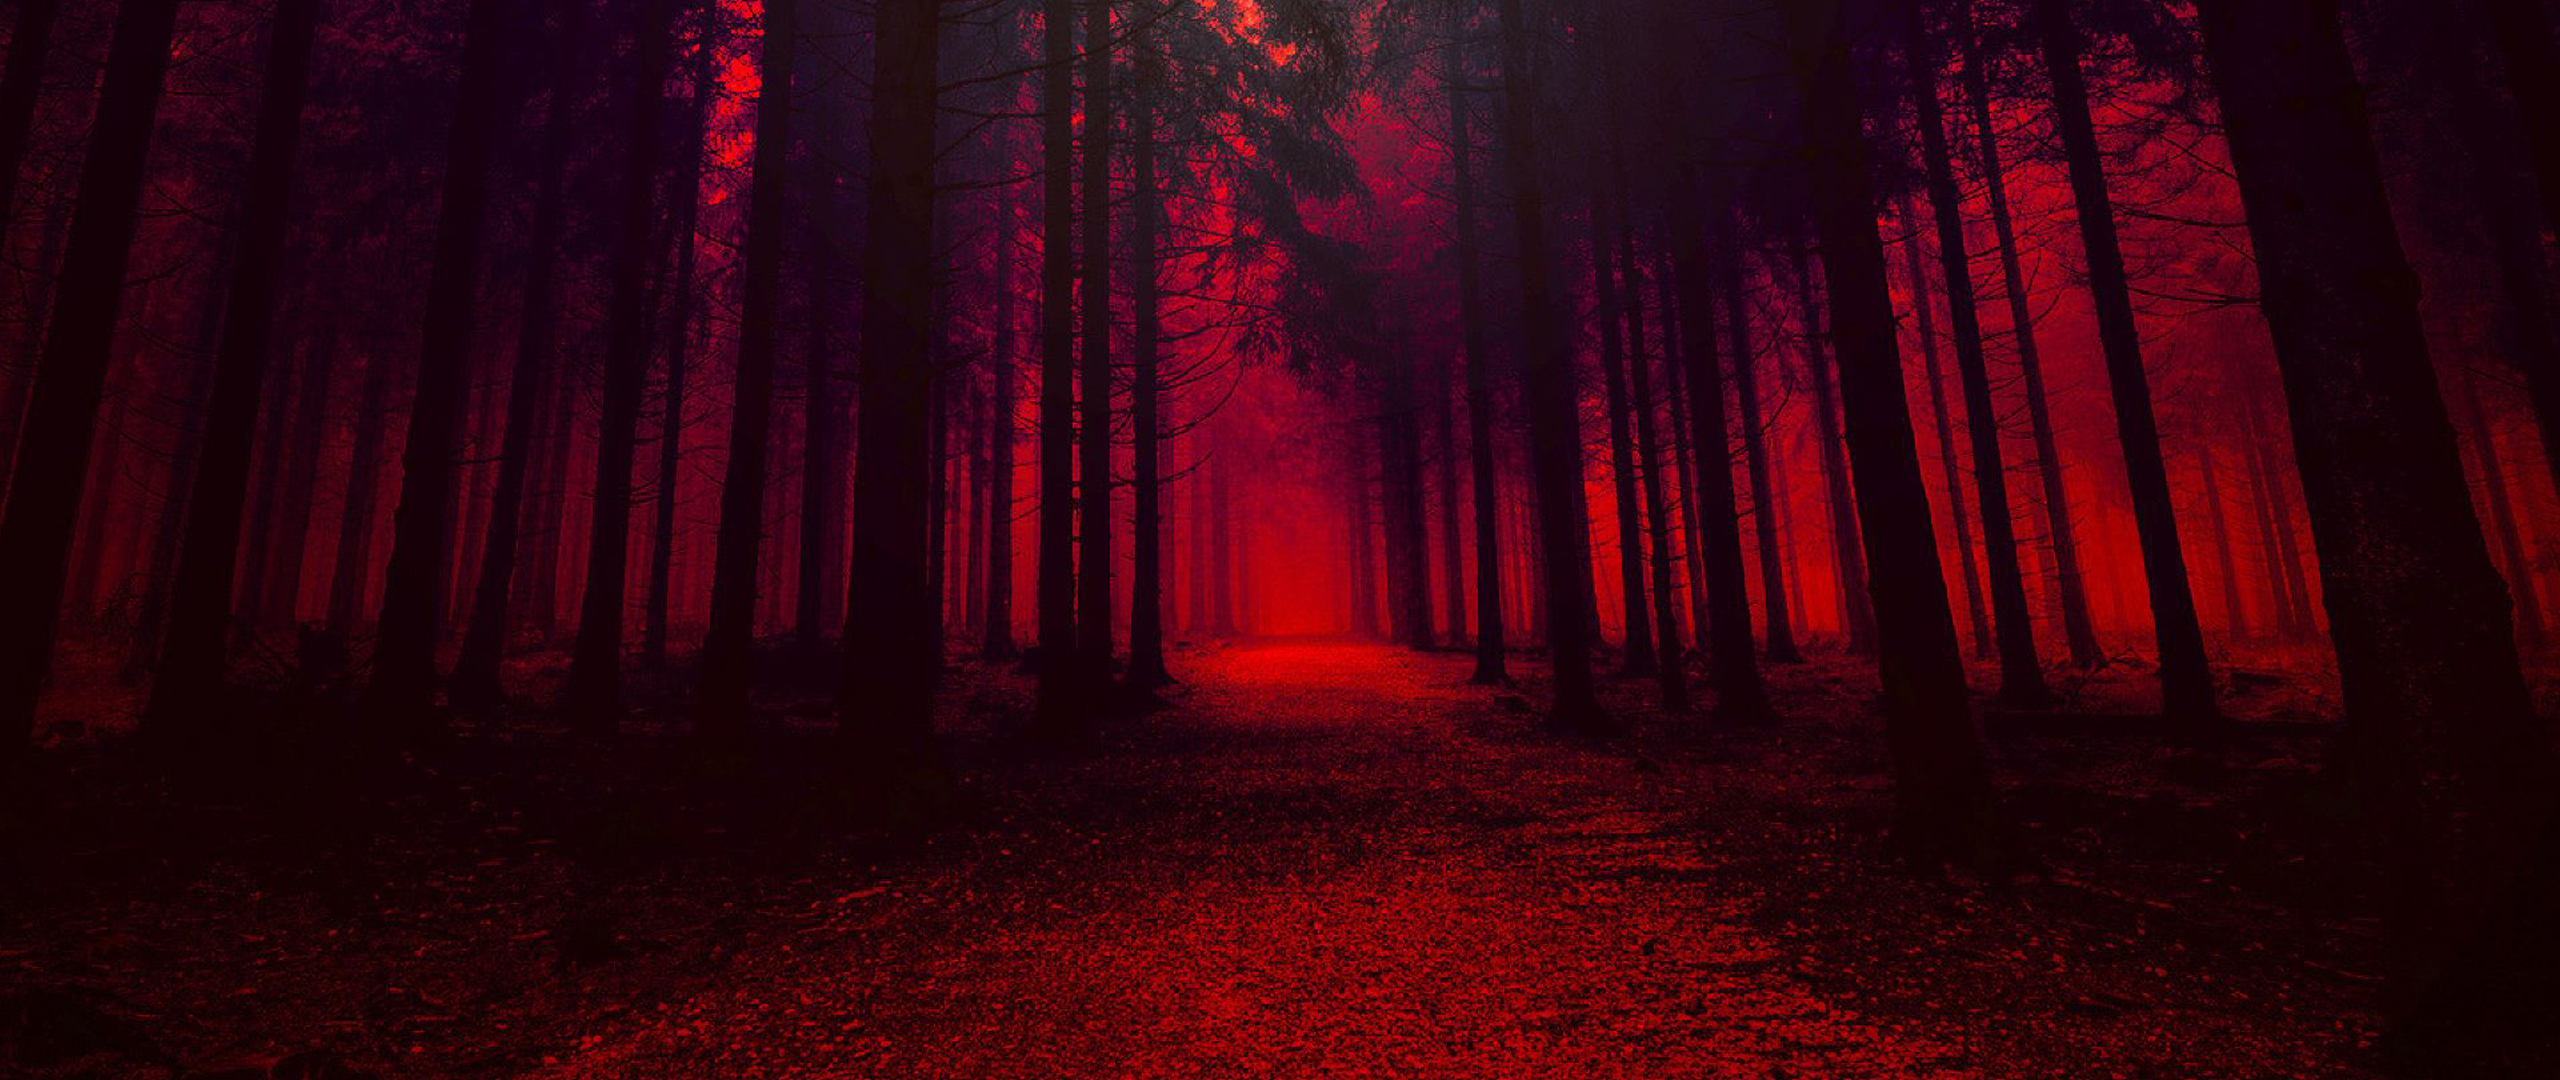 Download 2560x1080 Wallpaper Red Theme, Forest, Pathway, Dark, Dual Wide,  Widescreen, 2560x1080 Hd Image, Background, 34276